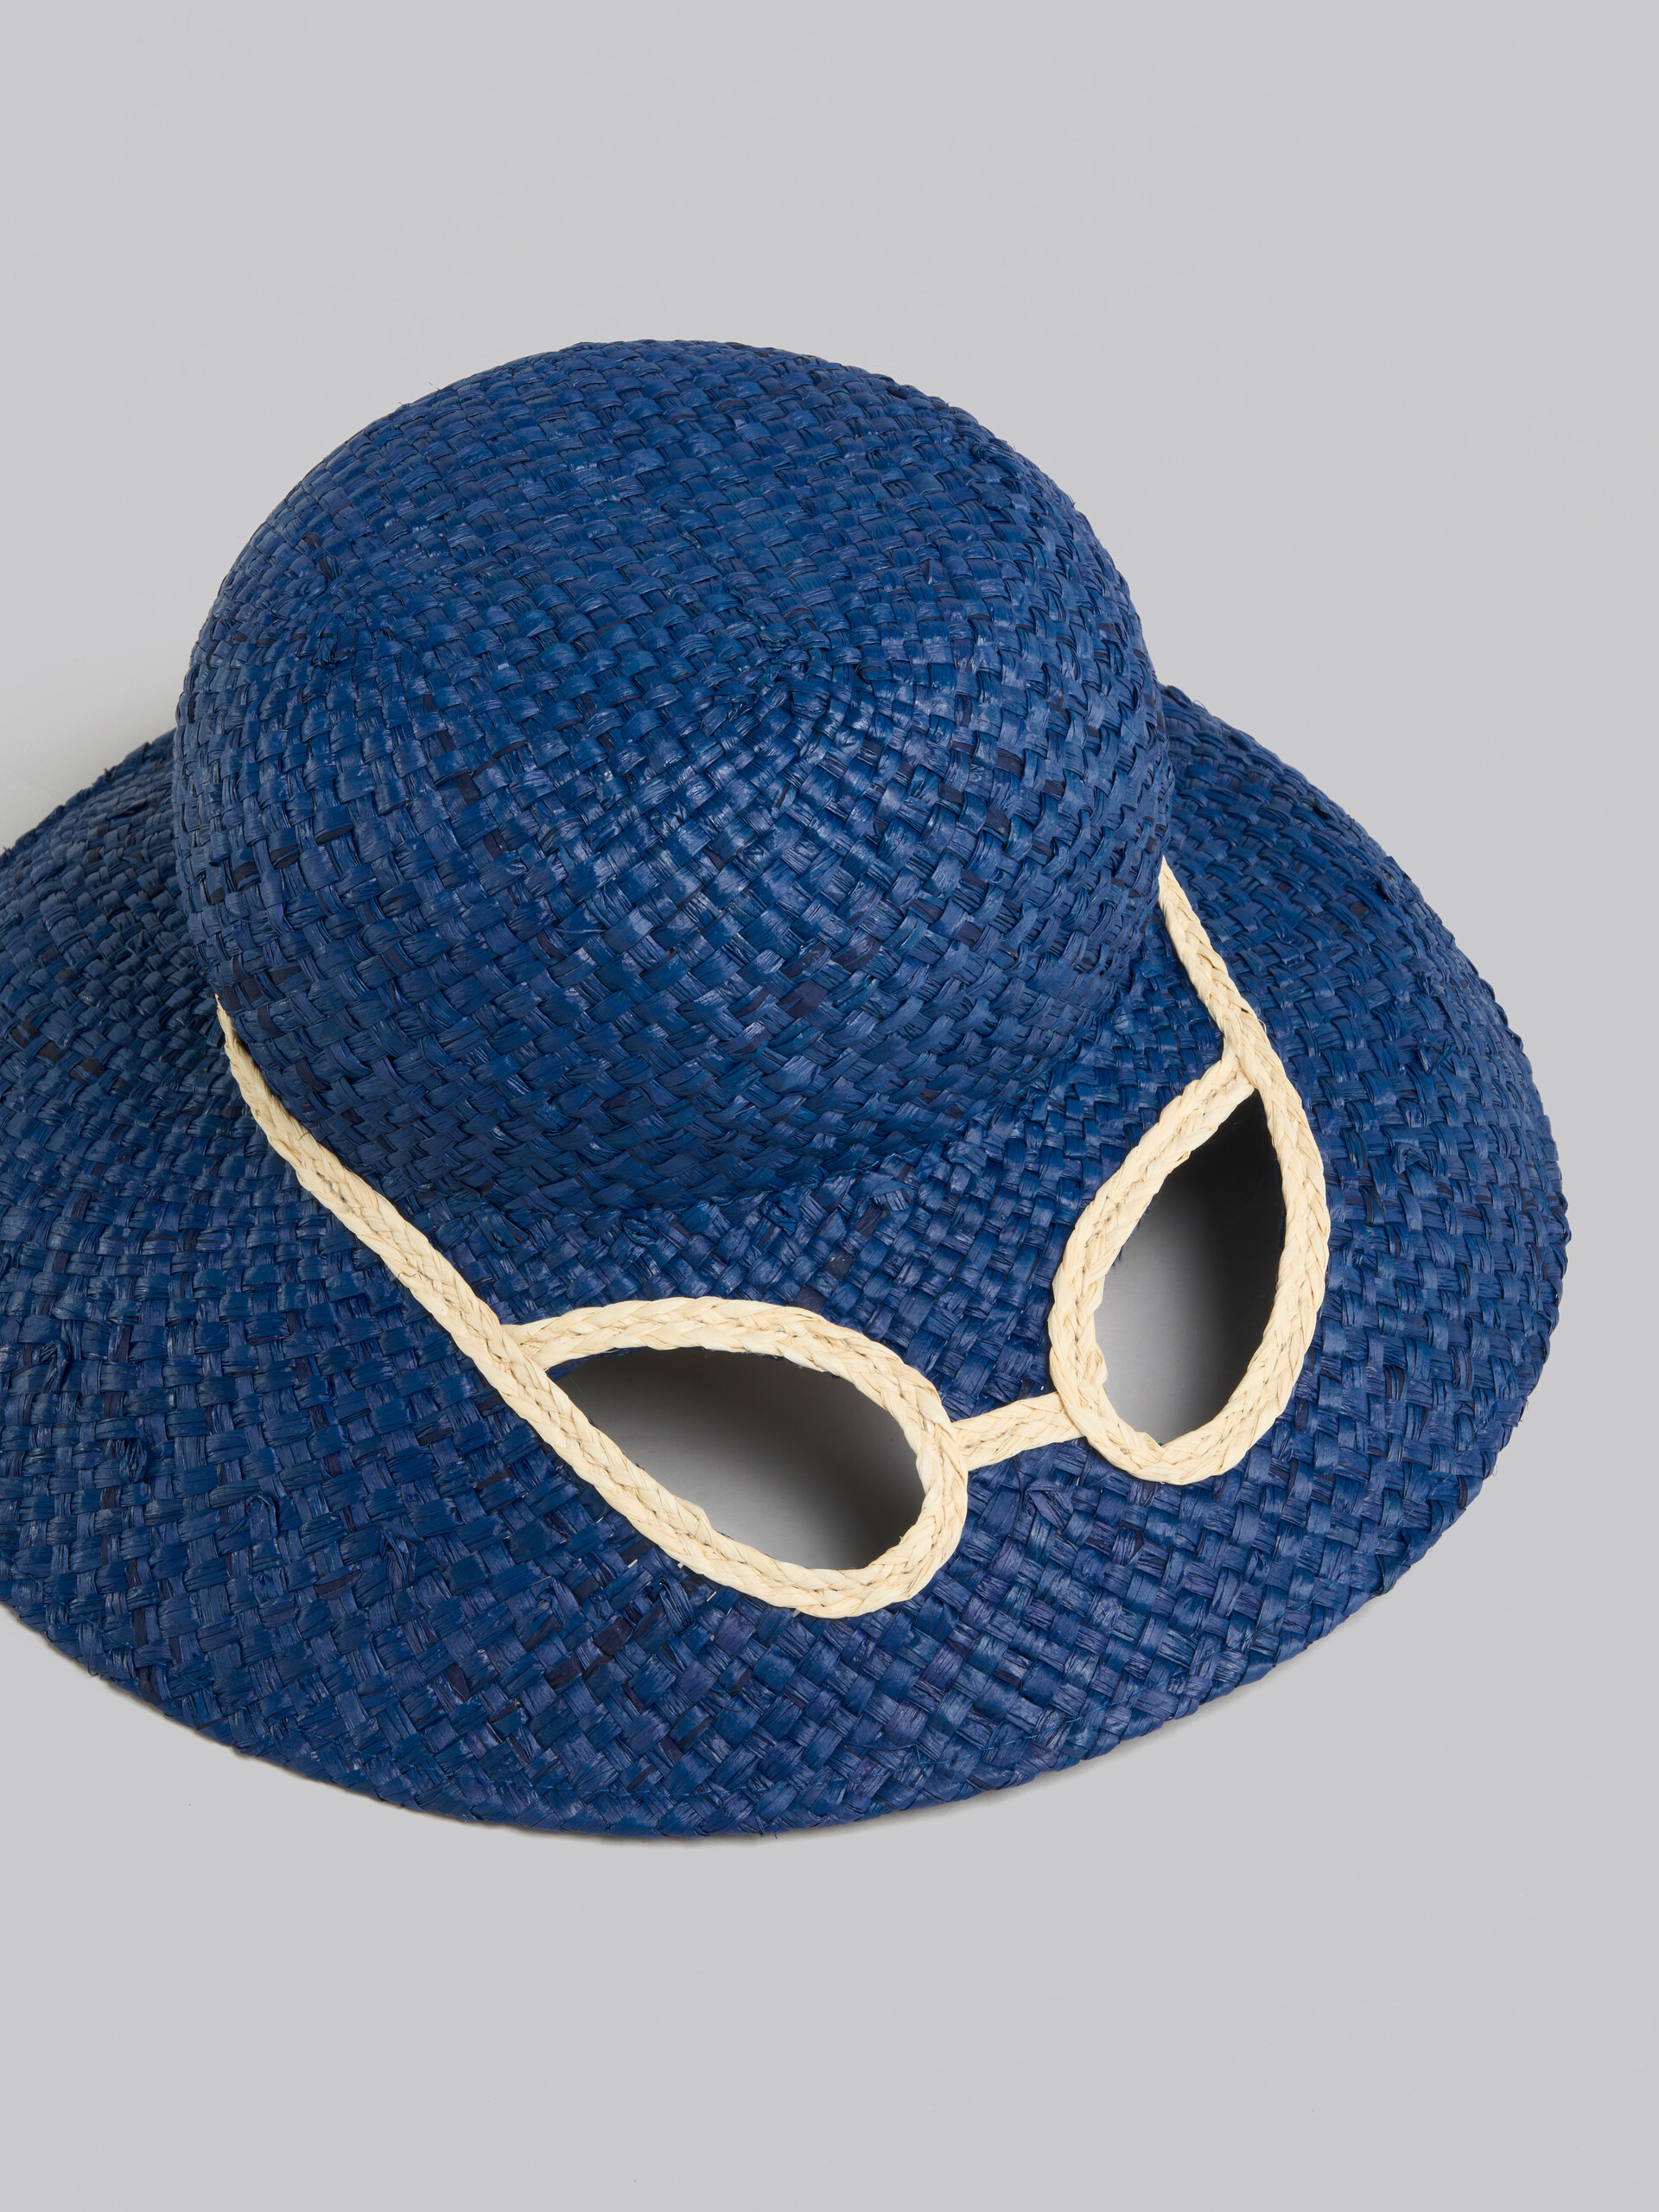 Marni x No Vacancy Inn - Blue hat in raffia with cut-outs - Hats - Image 4